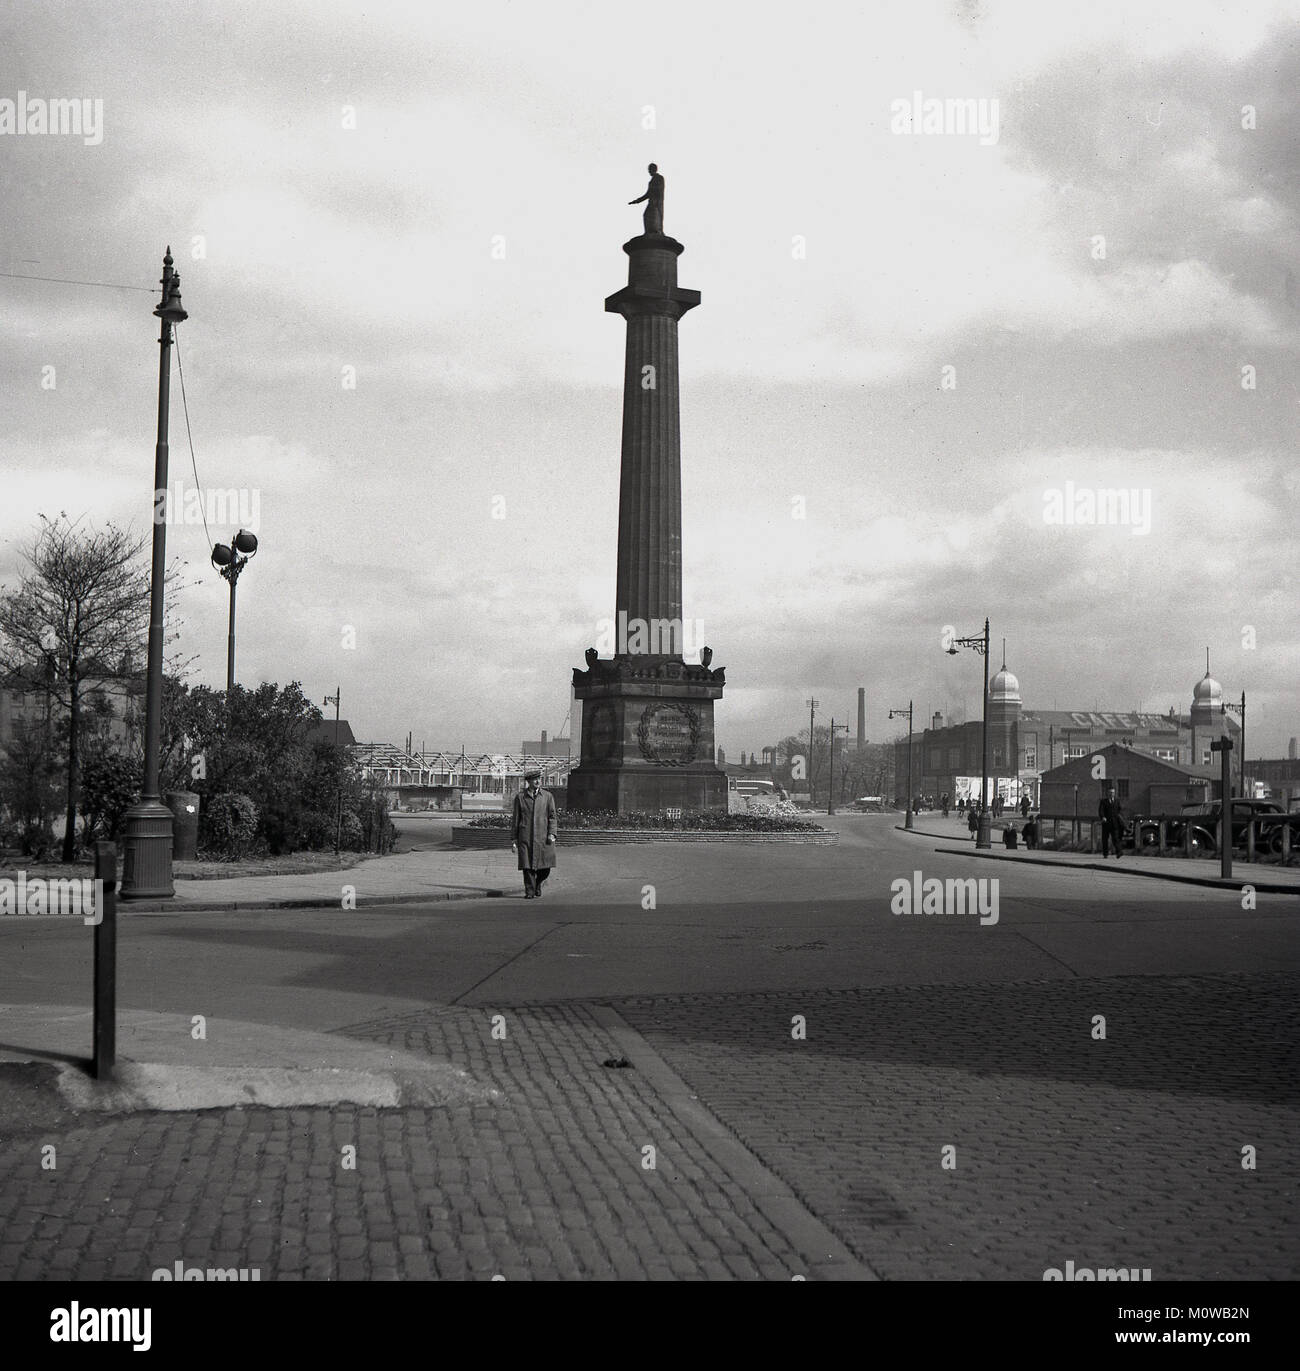 1950s, historical picture from this era showing the Wilberforce Monument in Hull city centre, Queen Victoria Dock Square. Erected in 1835 in the style of Nelson's column in London, the column was 90 feet, and the statue on top 12 feet tall, carved out of hard-wearing millstone grit.  The impressive memorial to William Wilberforce [1759-1833] who was a British politician and philanthropist, was because of his work as the leader of the movement to abolish the slave trade and it is this for which is he is rightly recognised. Stock Photo